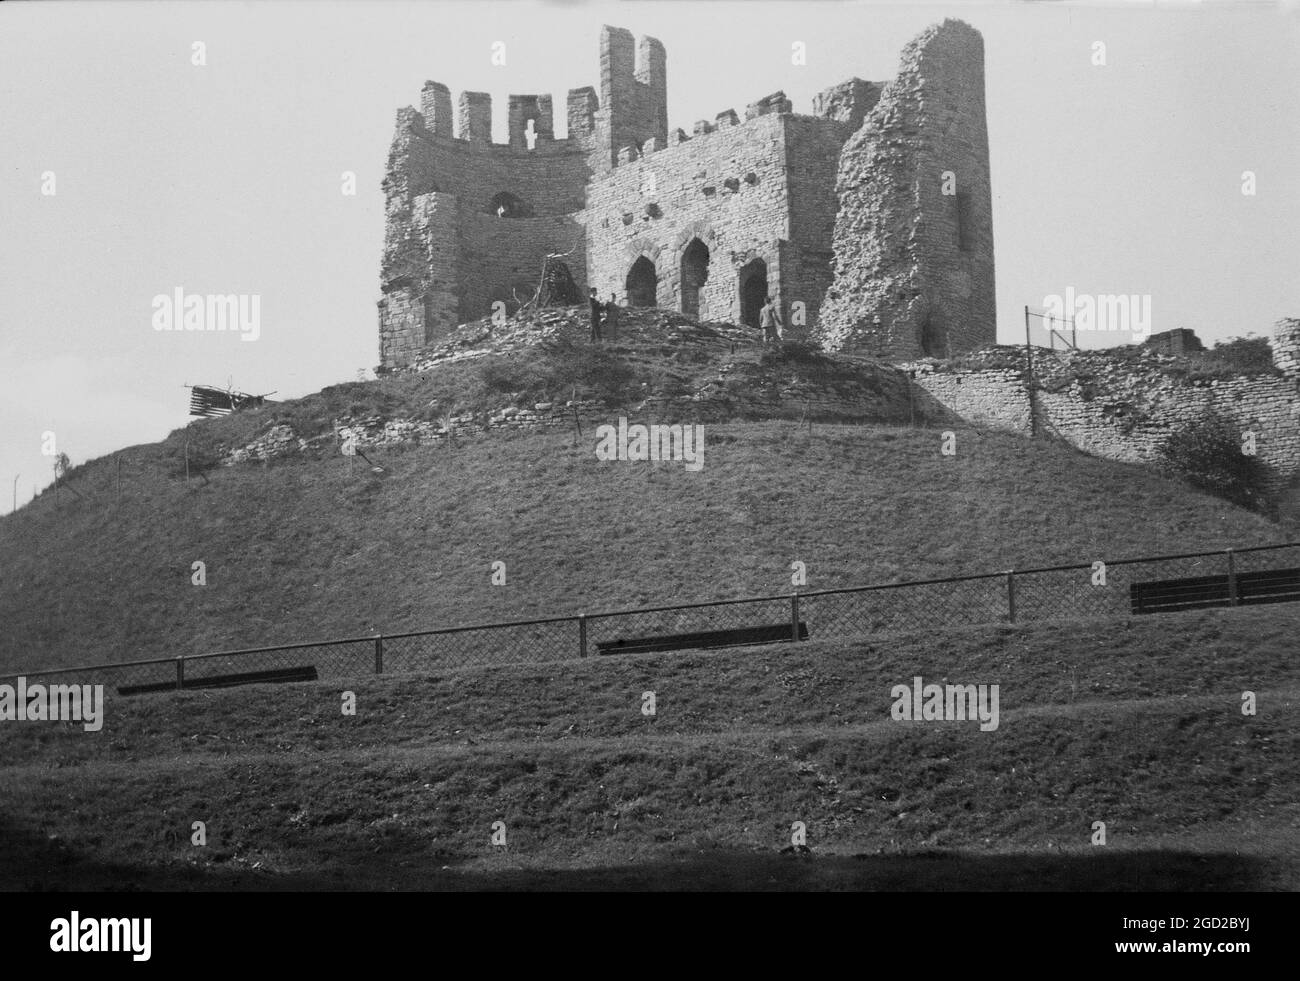 1940s, historical view of the ruins of Dudley castle, England, UK built on a large earth mound. Originally a wooden motte and bailey castle erected after the Norman Conquest, it was rebuilt as a stone fortification during the twelfth century. Demolished on the orders of King Henry II. Stock Photo